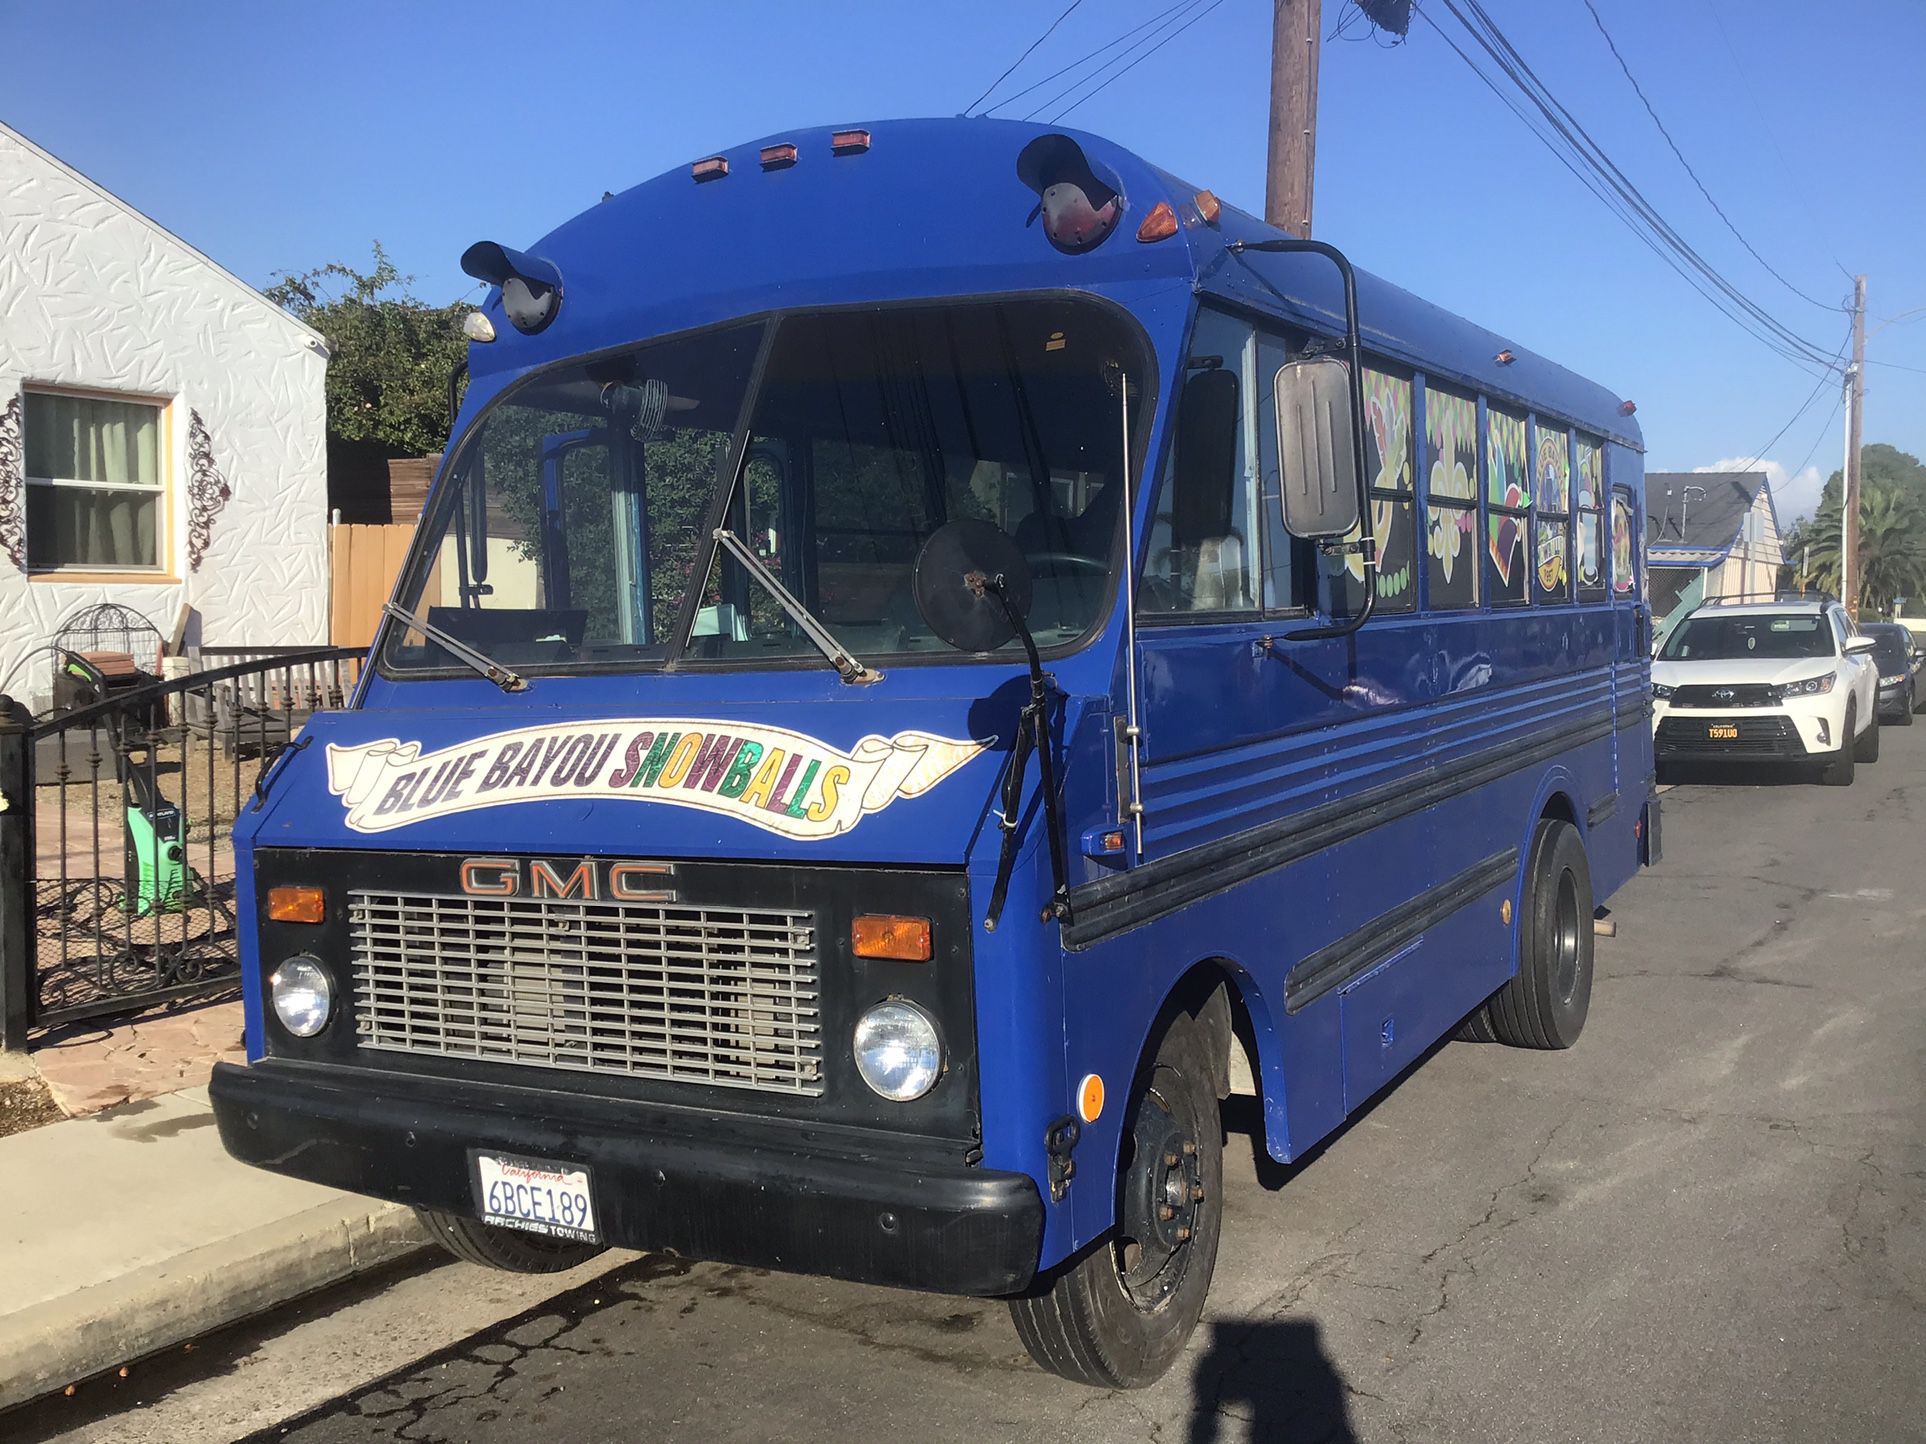 1982 Thomas GMC School Bus 21”converted into mobile business